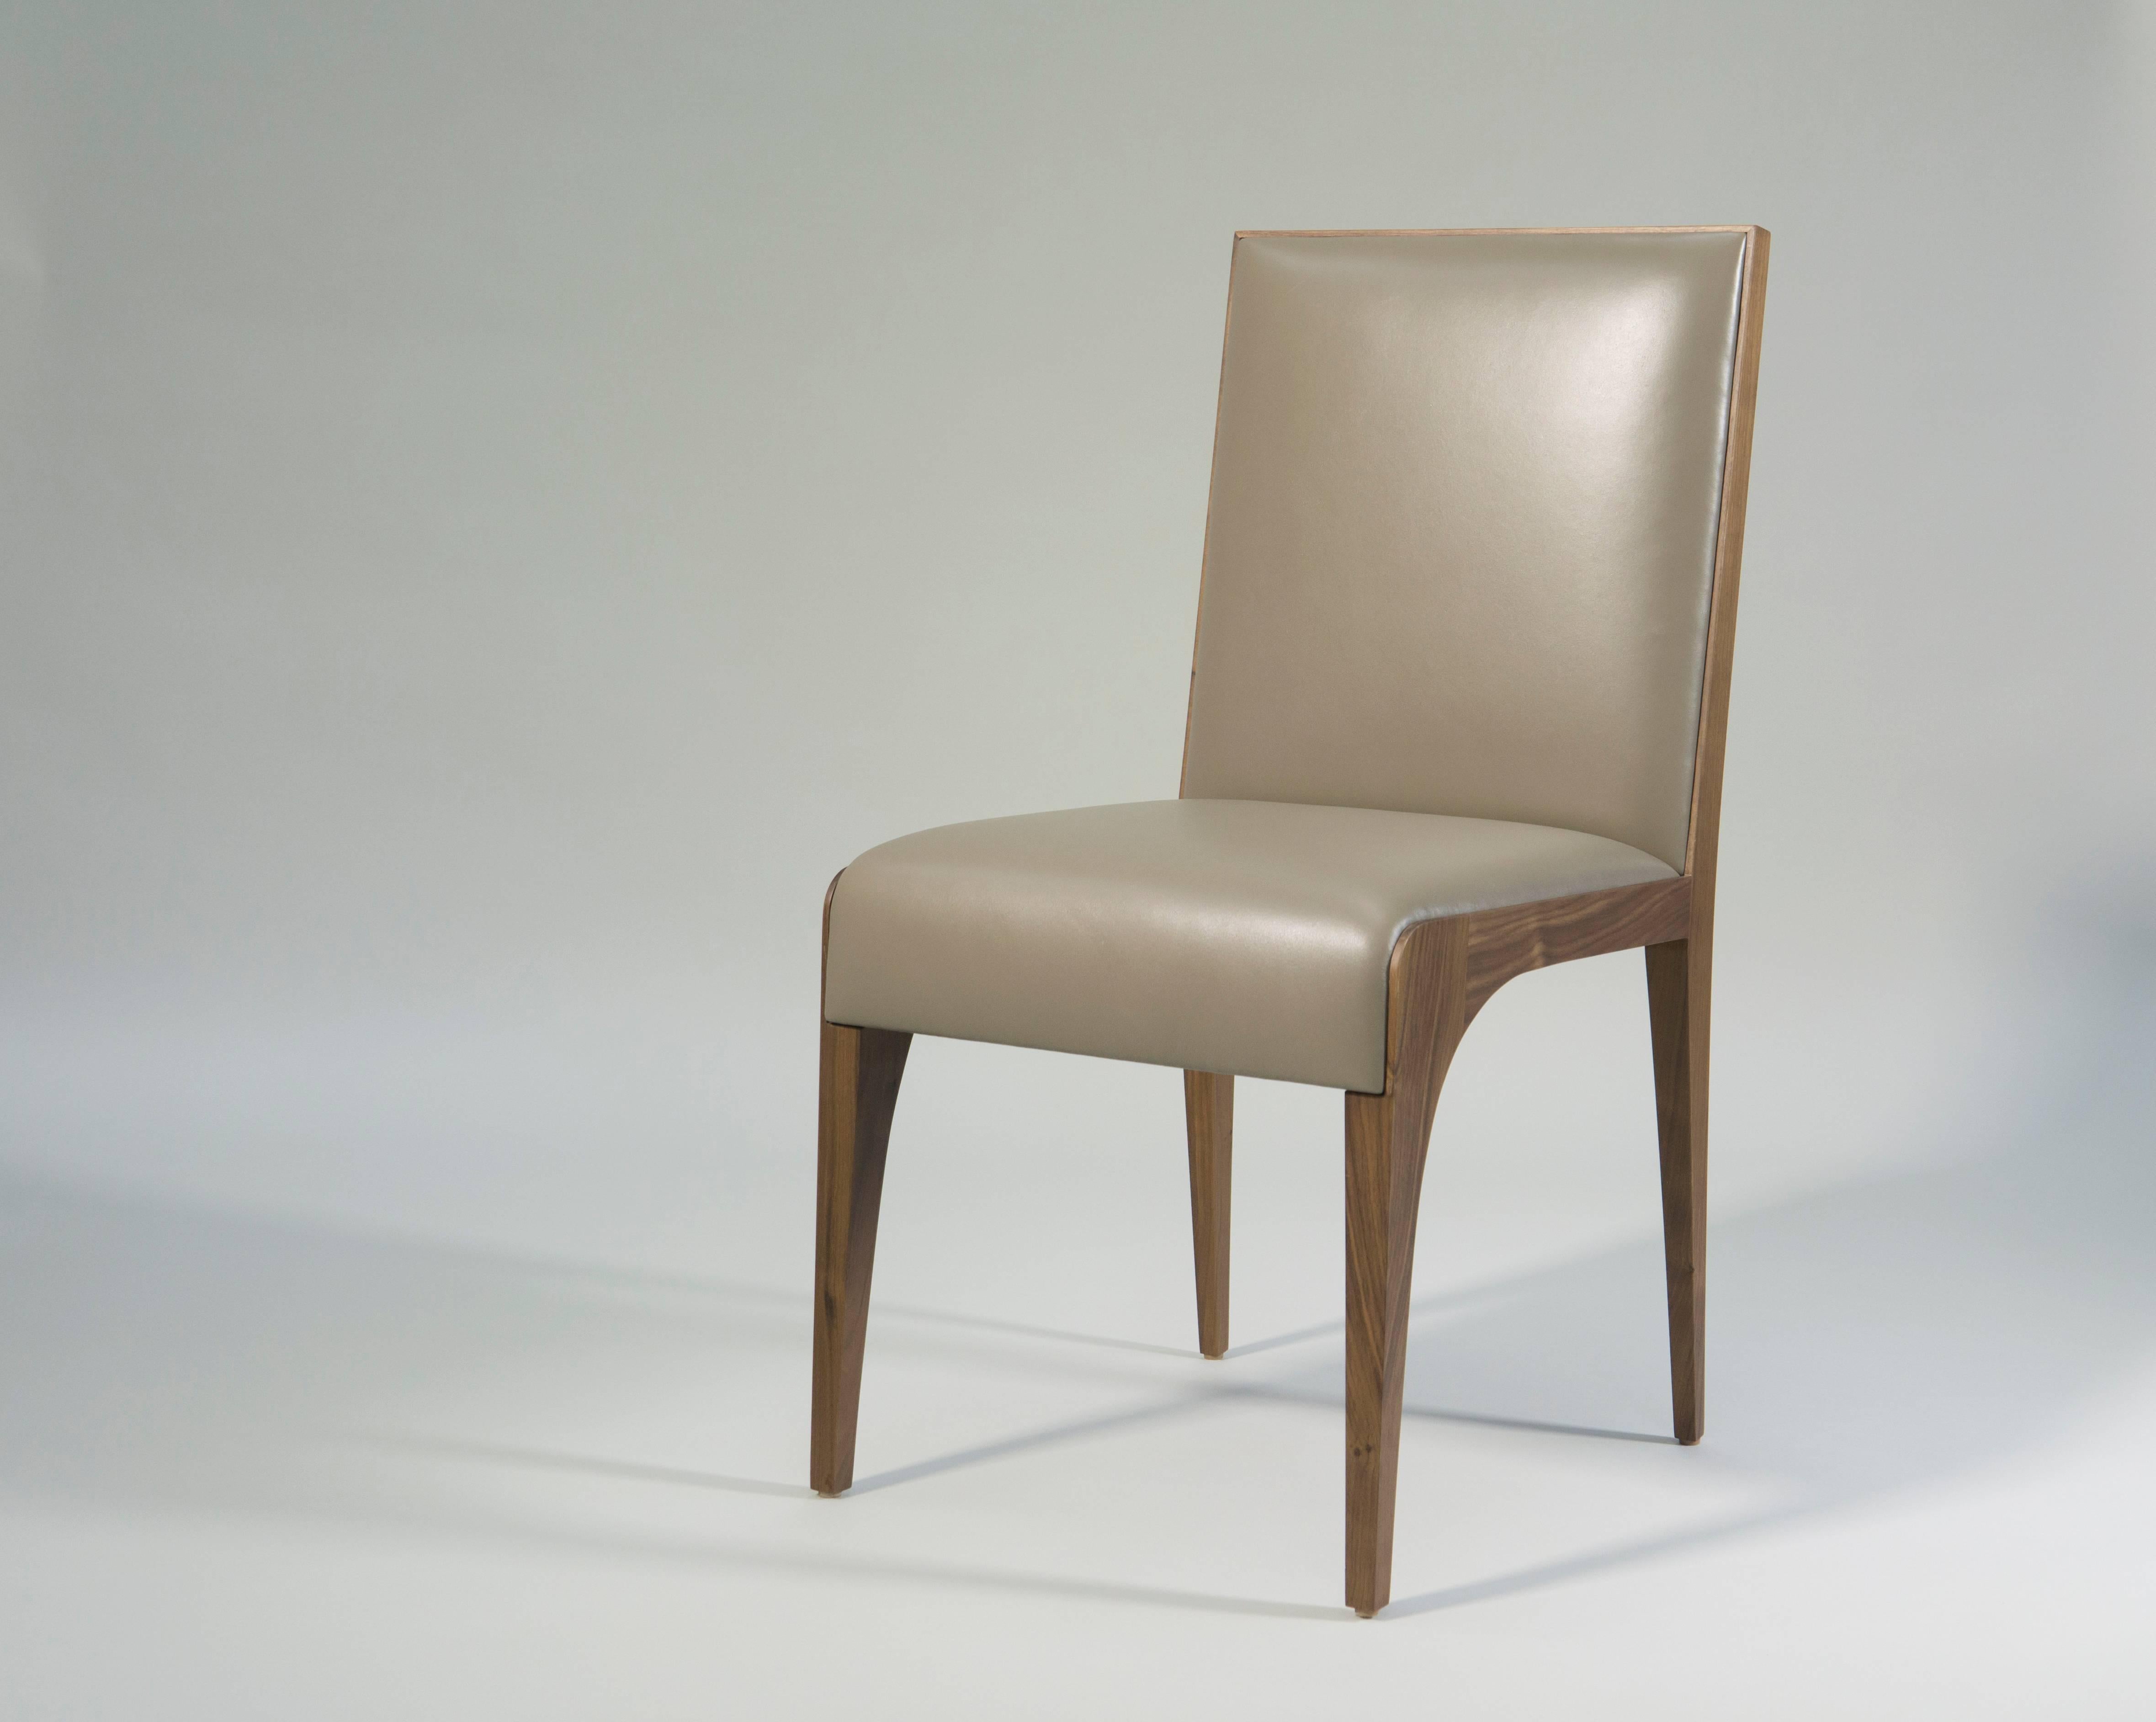 A pair of elegant dining or side chairs by Tinatin Kilaberidze.

Made of her favorite walnut wood and upholstered in leather, their beautiful form and fine craftsmanship make these chairs timeless.
The dining chairs can be ordered with fabric or